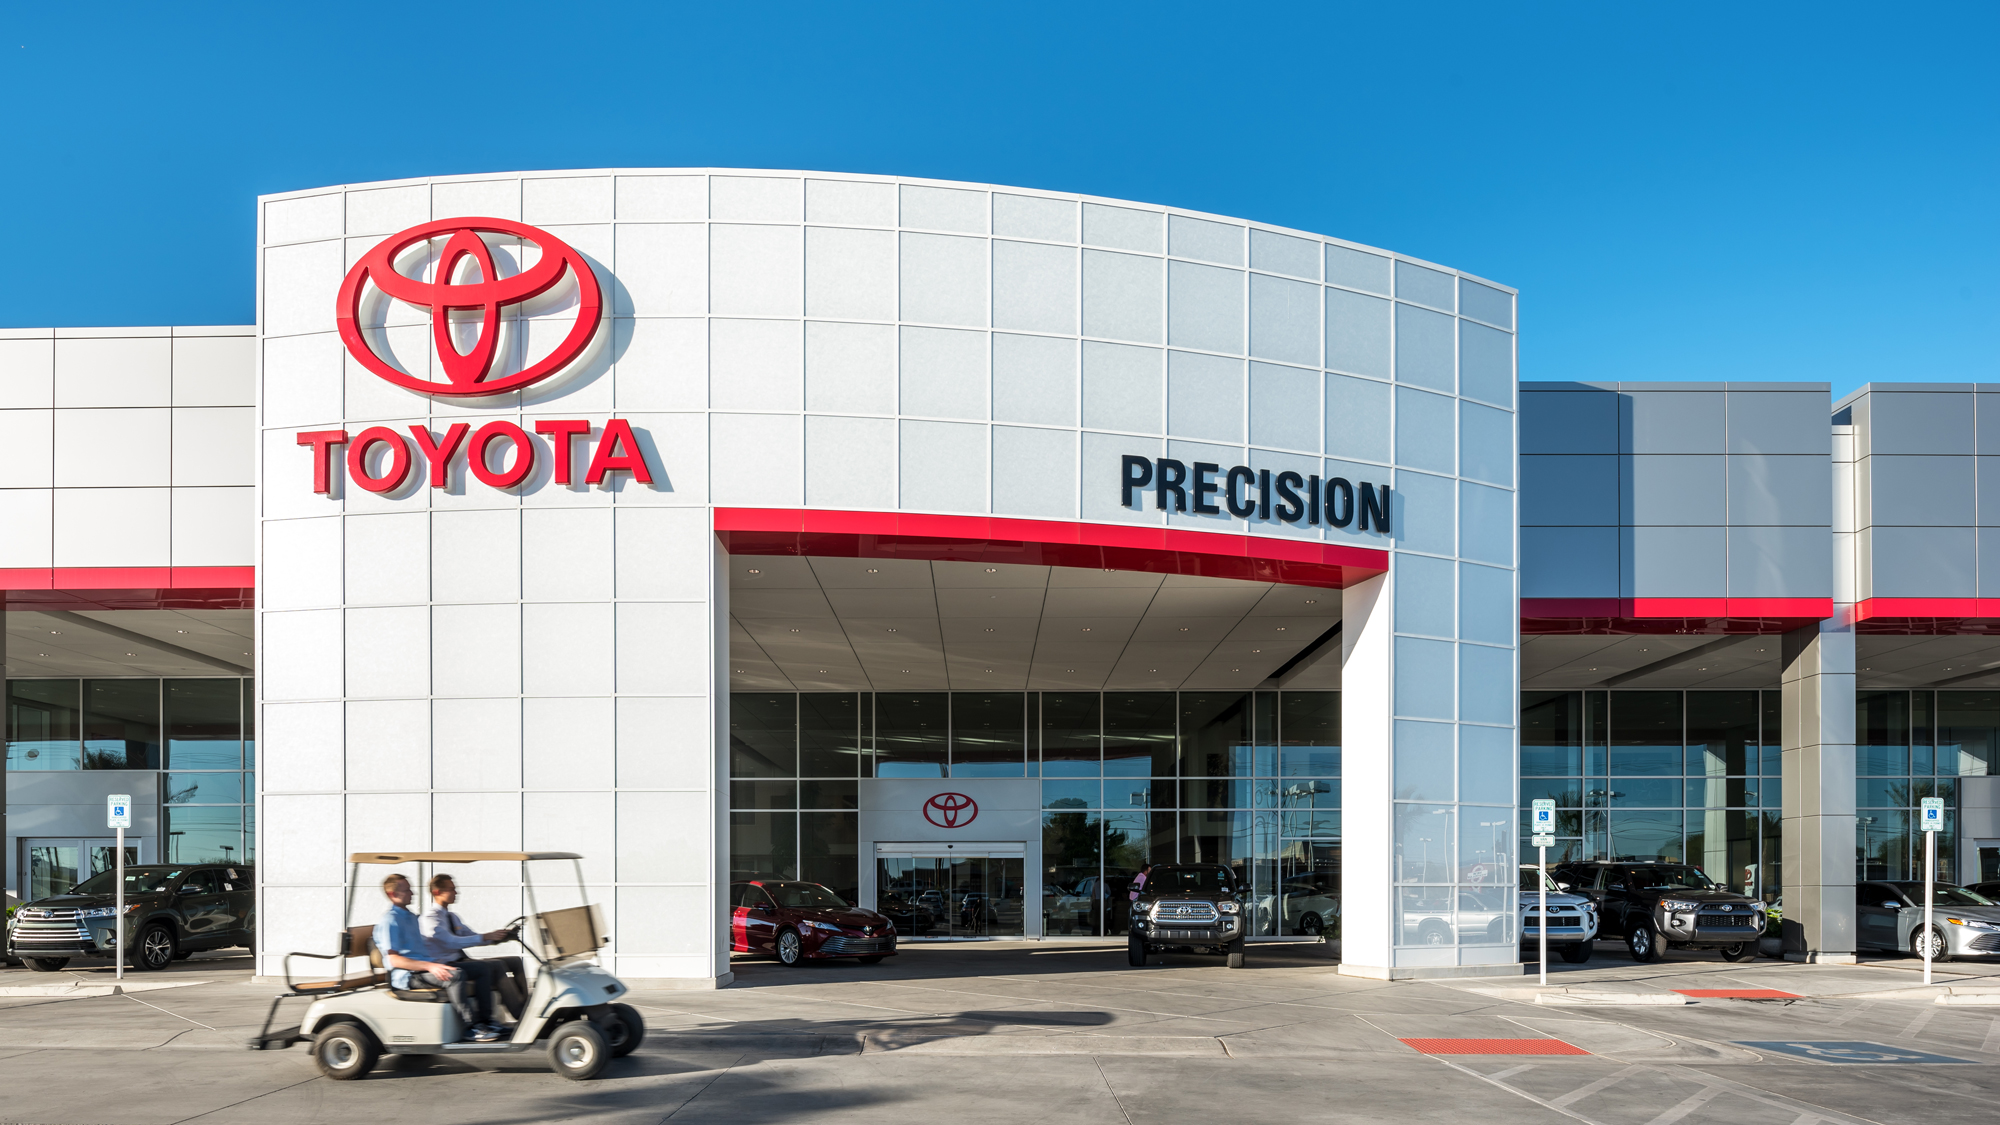 Precision Toyota_Architecture Photography_An Pham Photography_AN7_5377.jpg